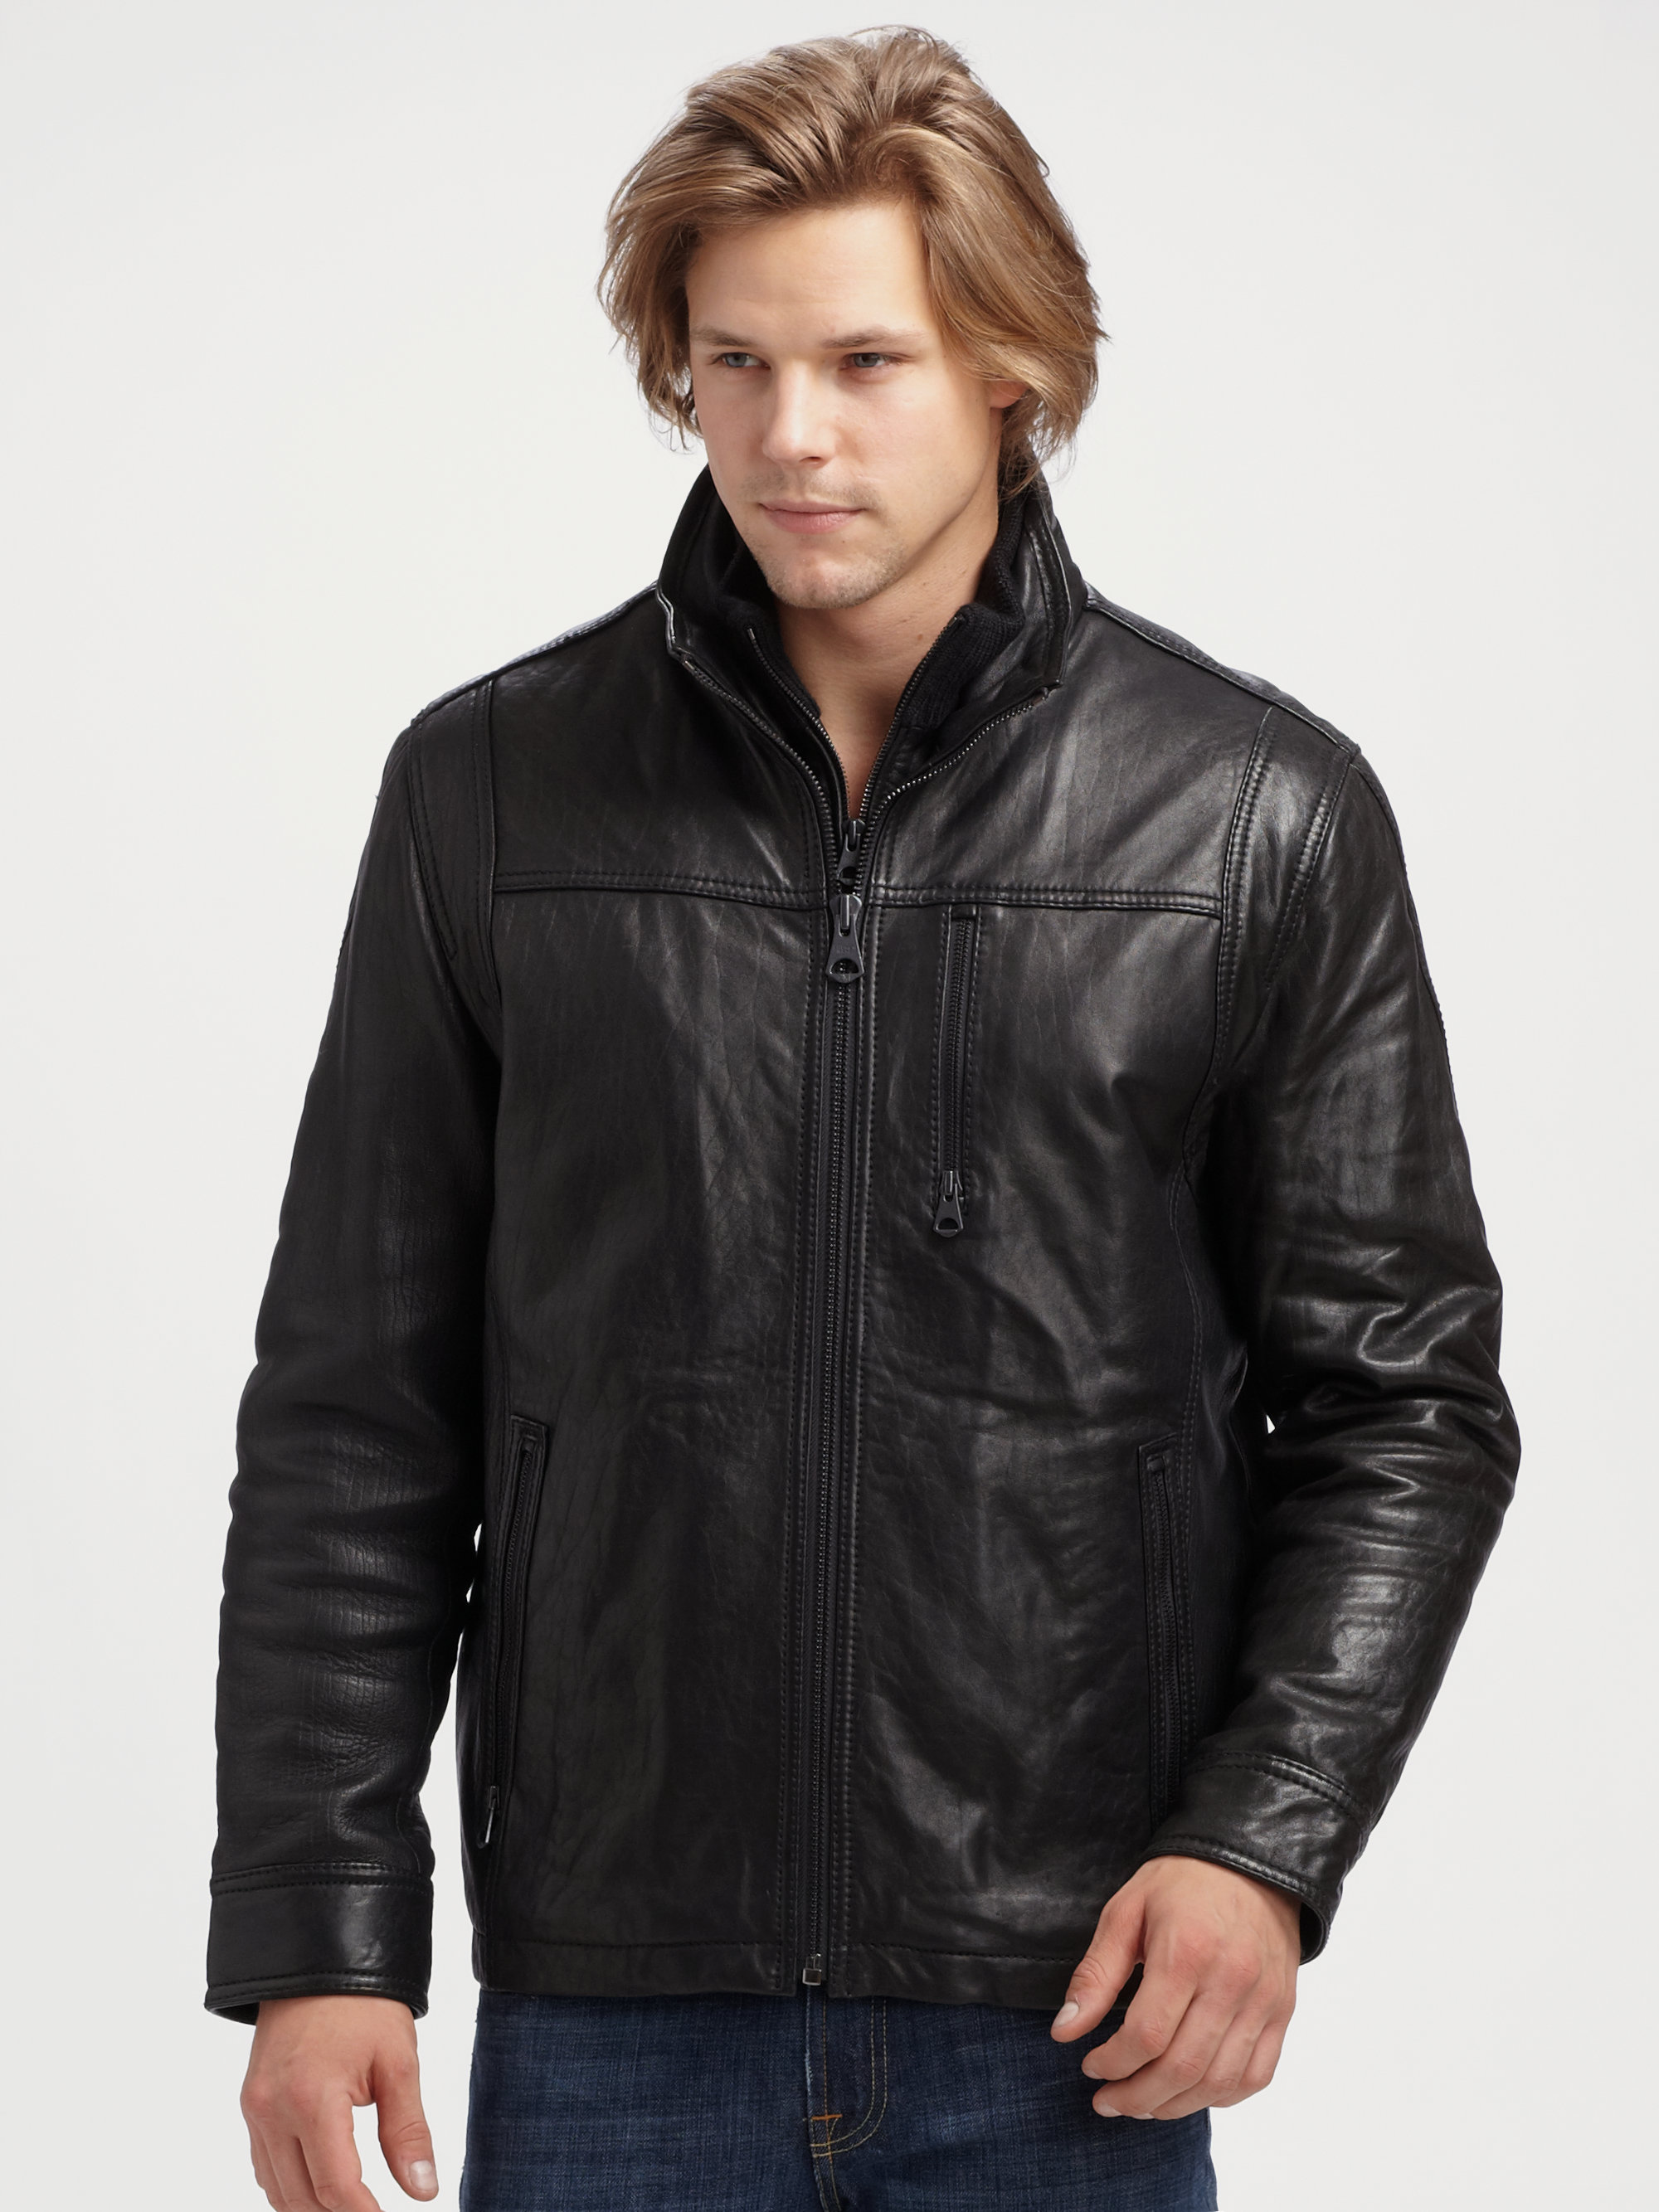 Andrew marc Daily Driver Leather Jacket in Black for Men | Lyst